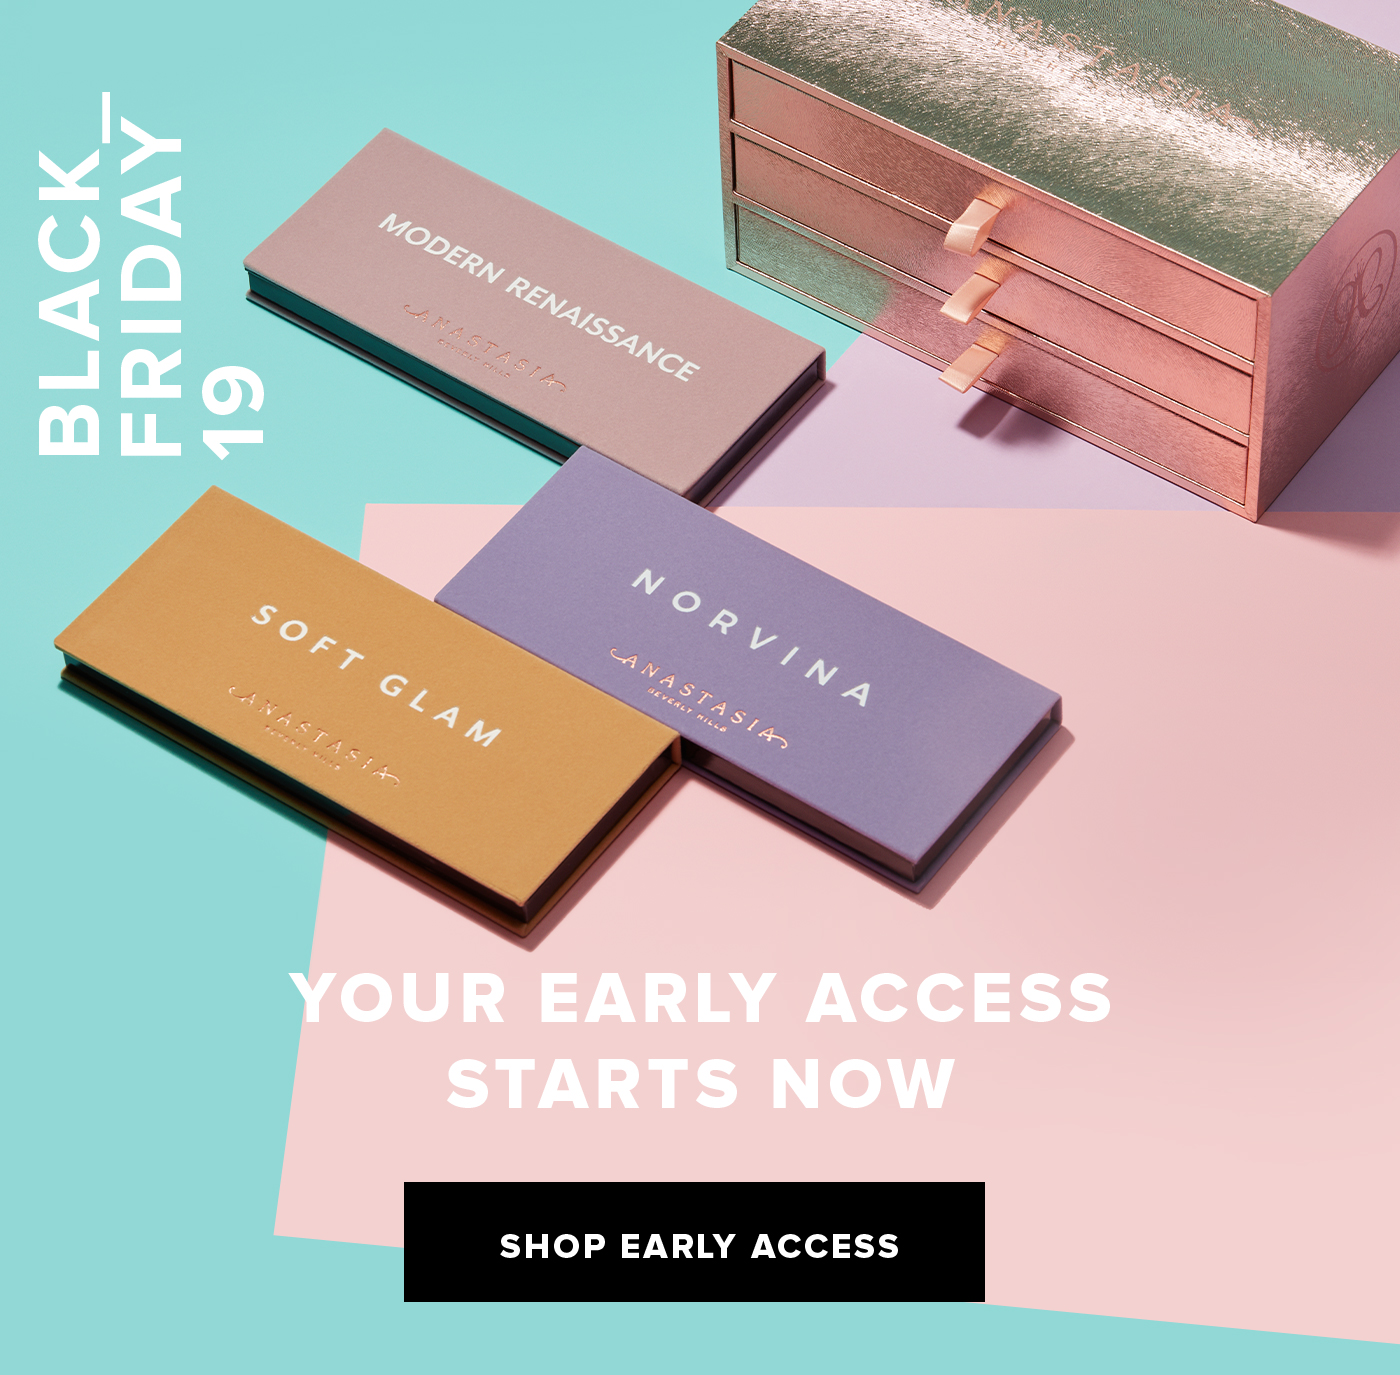 BLACK FRIDAY 19 YOUR EARLY ACCESS STARTS NOW SHOP EARLY ACCESS